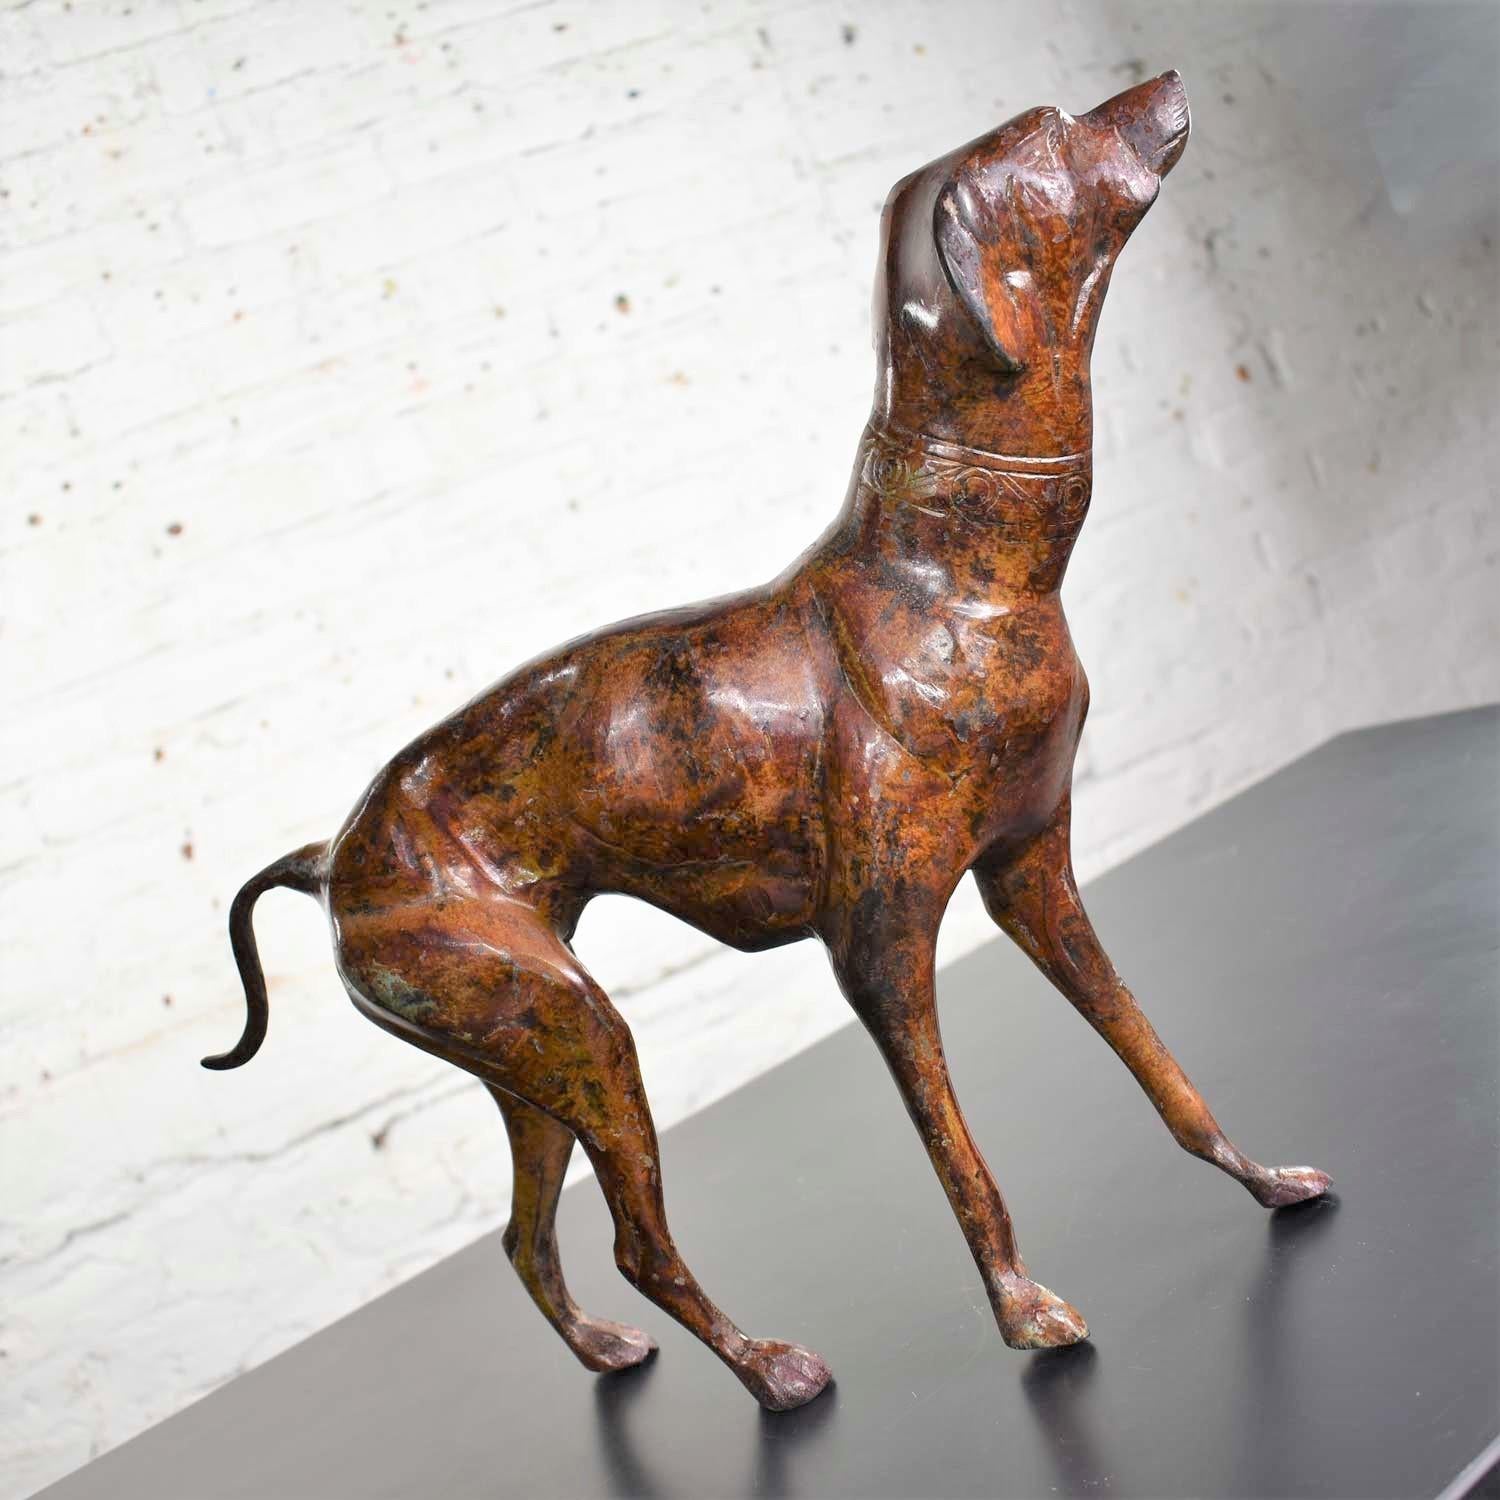 Handsome medium size bronze sculpture of a greyhound or whippet. It is in fabulous vintage condition. Please see photos, circa late 20th century.

If you are a dog lover (and who isn’t?), you will adore this stately statue of one of the oldest of